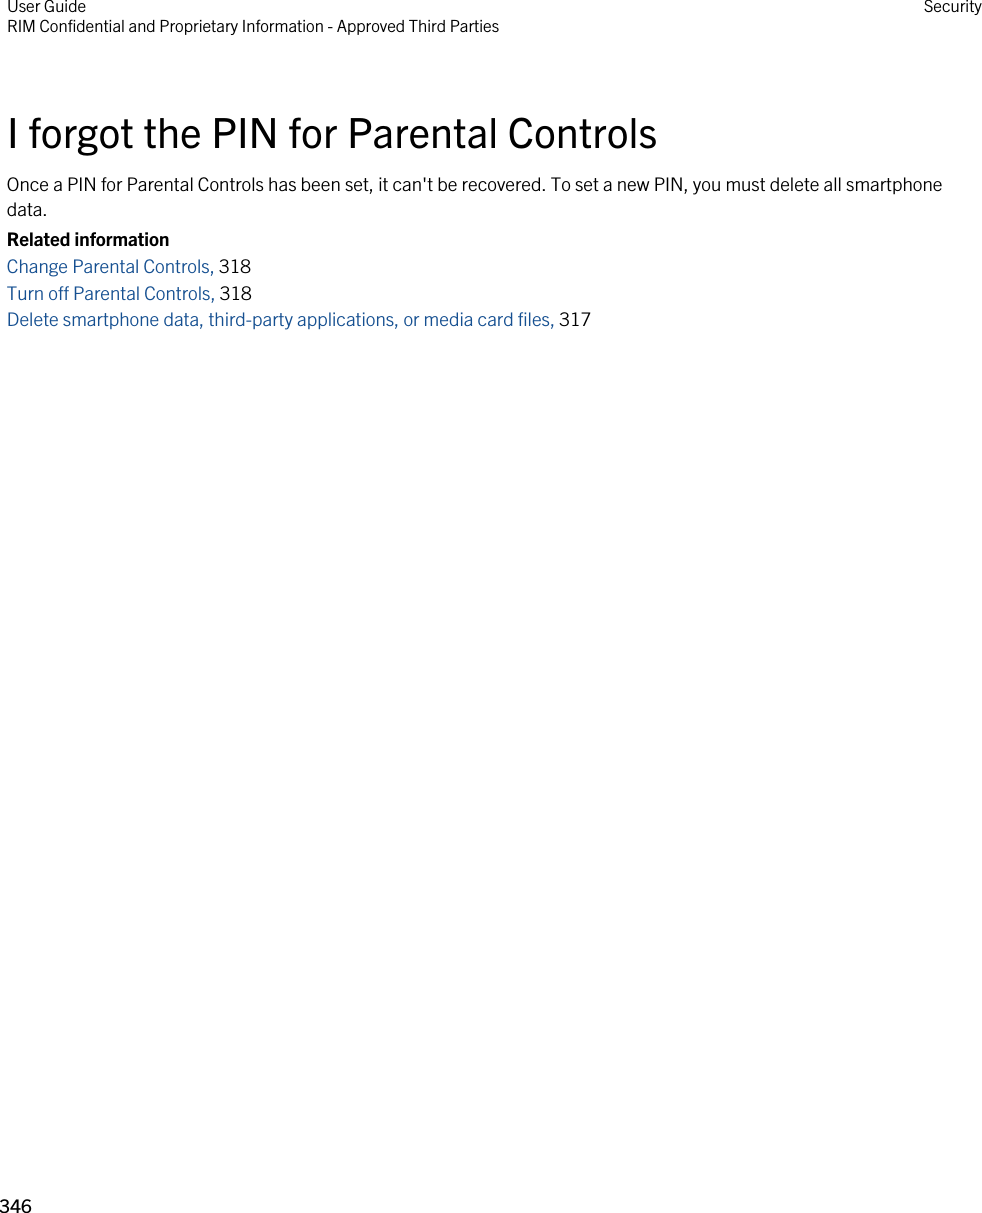 I forgot the PIN for Parental ControlsOnce a PIN for Parental Controls has been set, it can&apos;t be recovered. To set a new PIN, you must delete all smartphone data.Related informationChange Parental Controls, 318 Turn off Parental Controls, 318 Delete smartphone data, third-party applications, or media card files, 317 User GuideRIM Confidential and Proprietary Information - Approved Third Parties Security346 